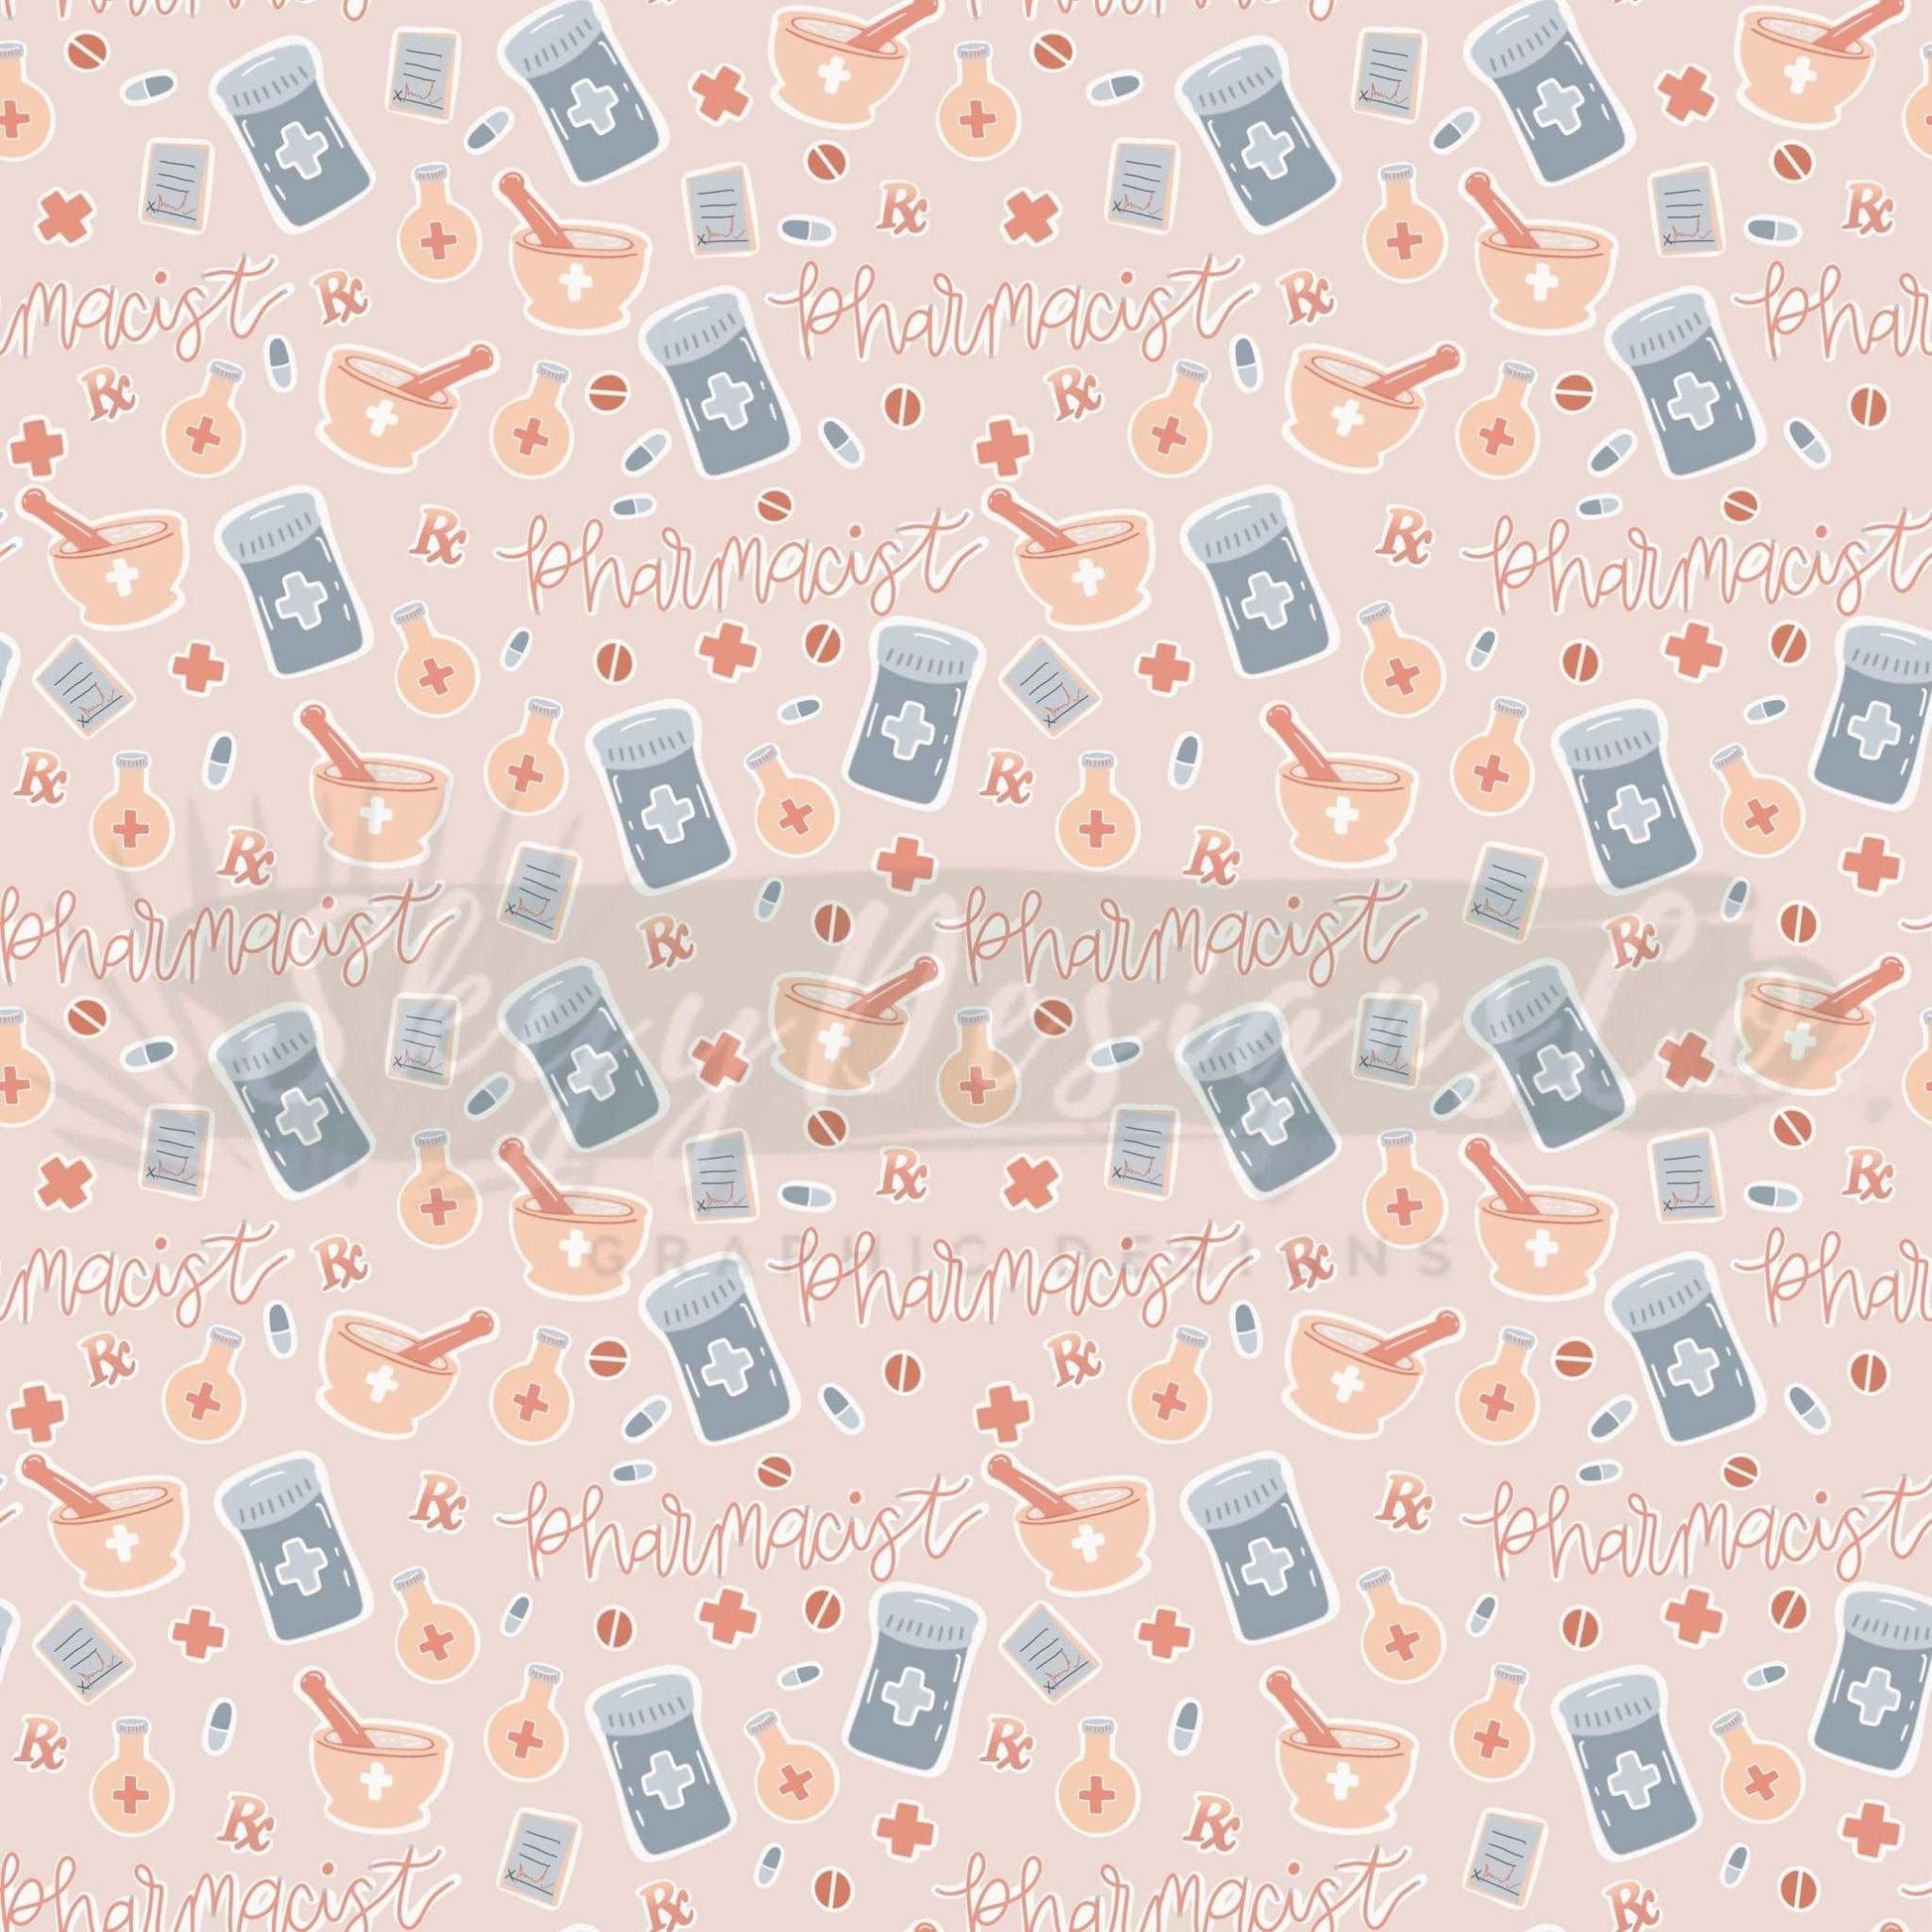 Apothecary Seamless Pattern Graphic by Nic Means Business